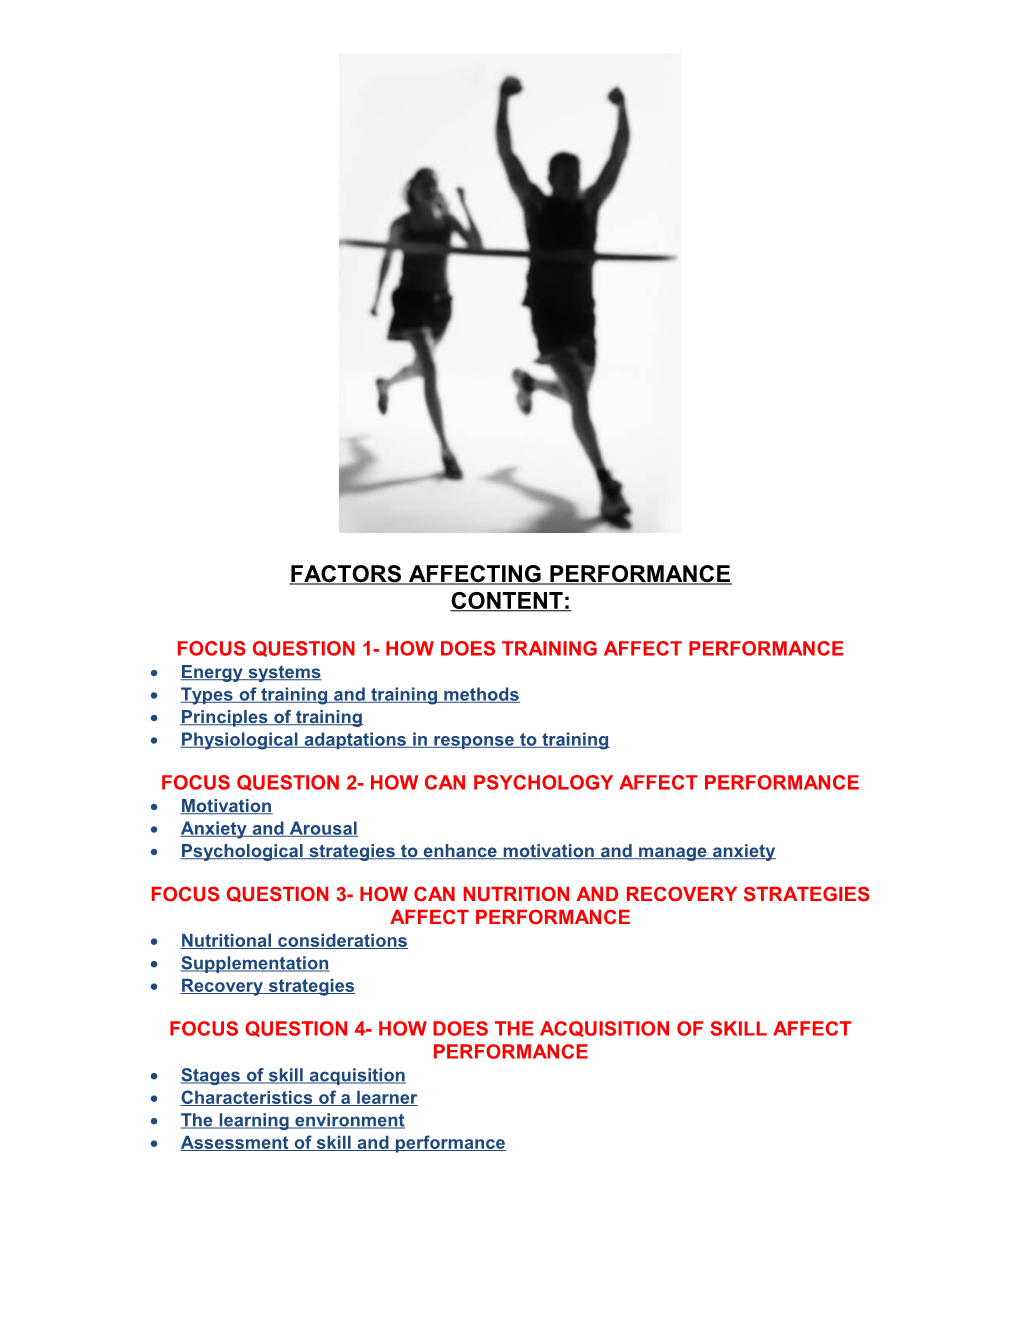 Focus Question 1- How Does Training Affect Performance